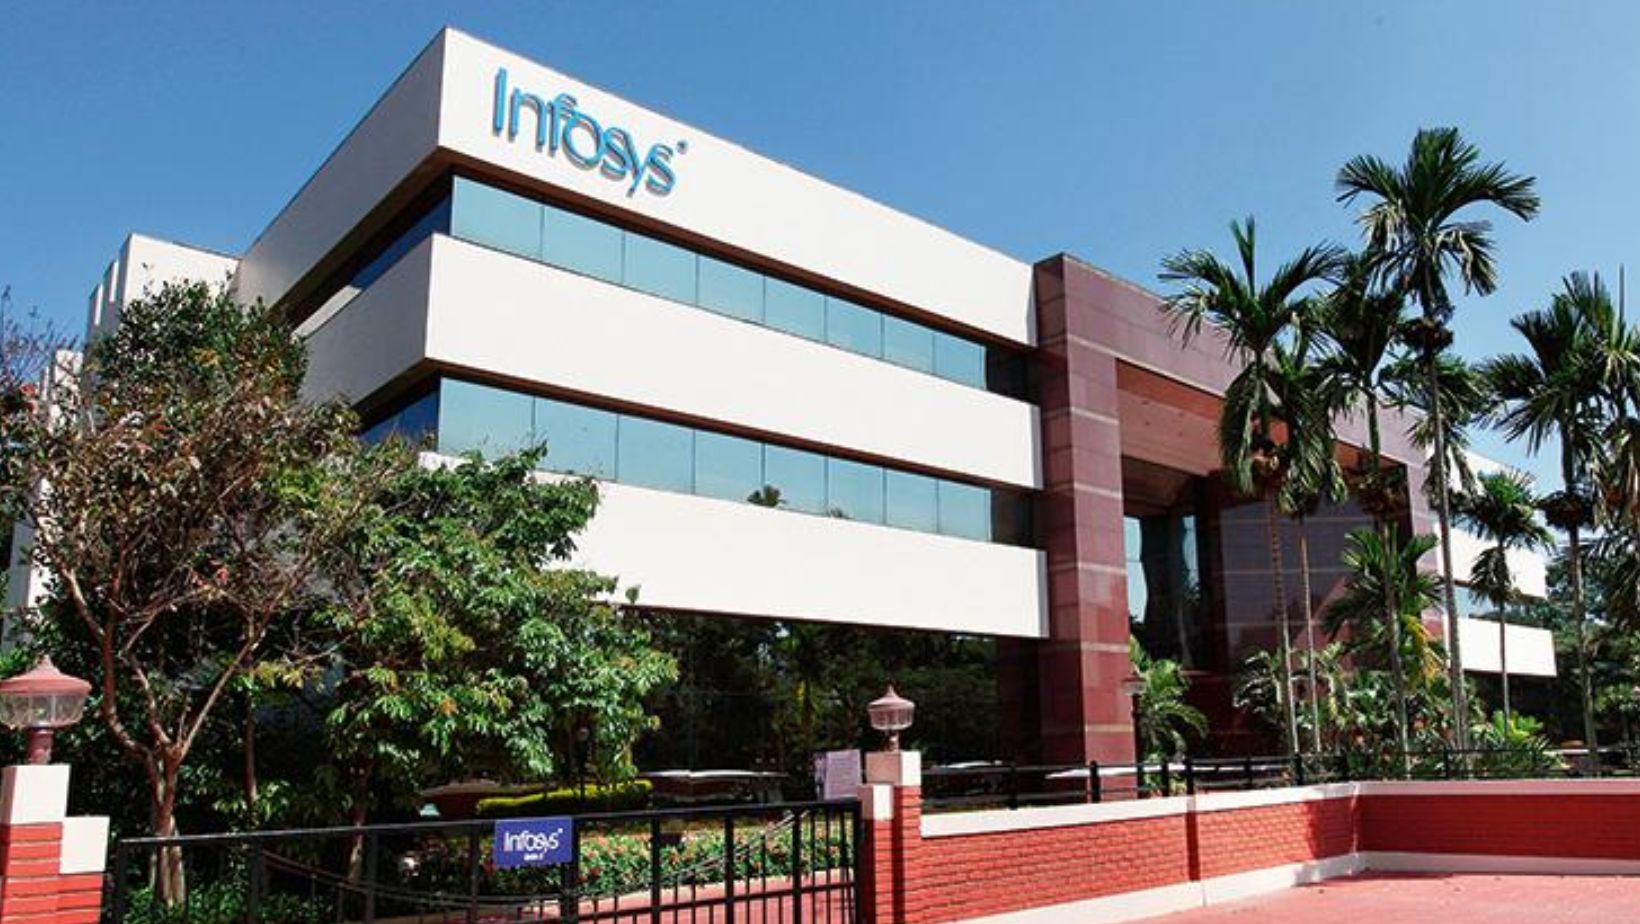 Infosys Hiring Data Engineer Job for Freshers Apply Right Now